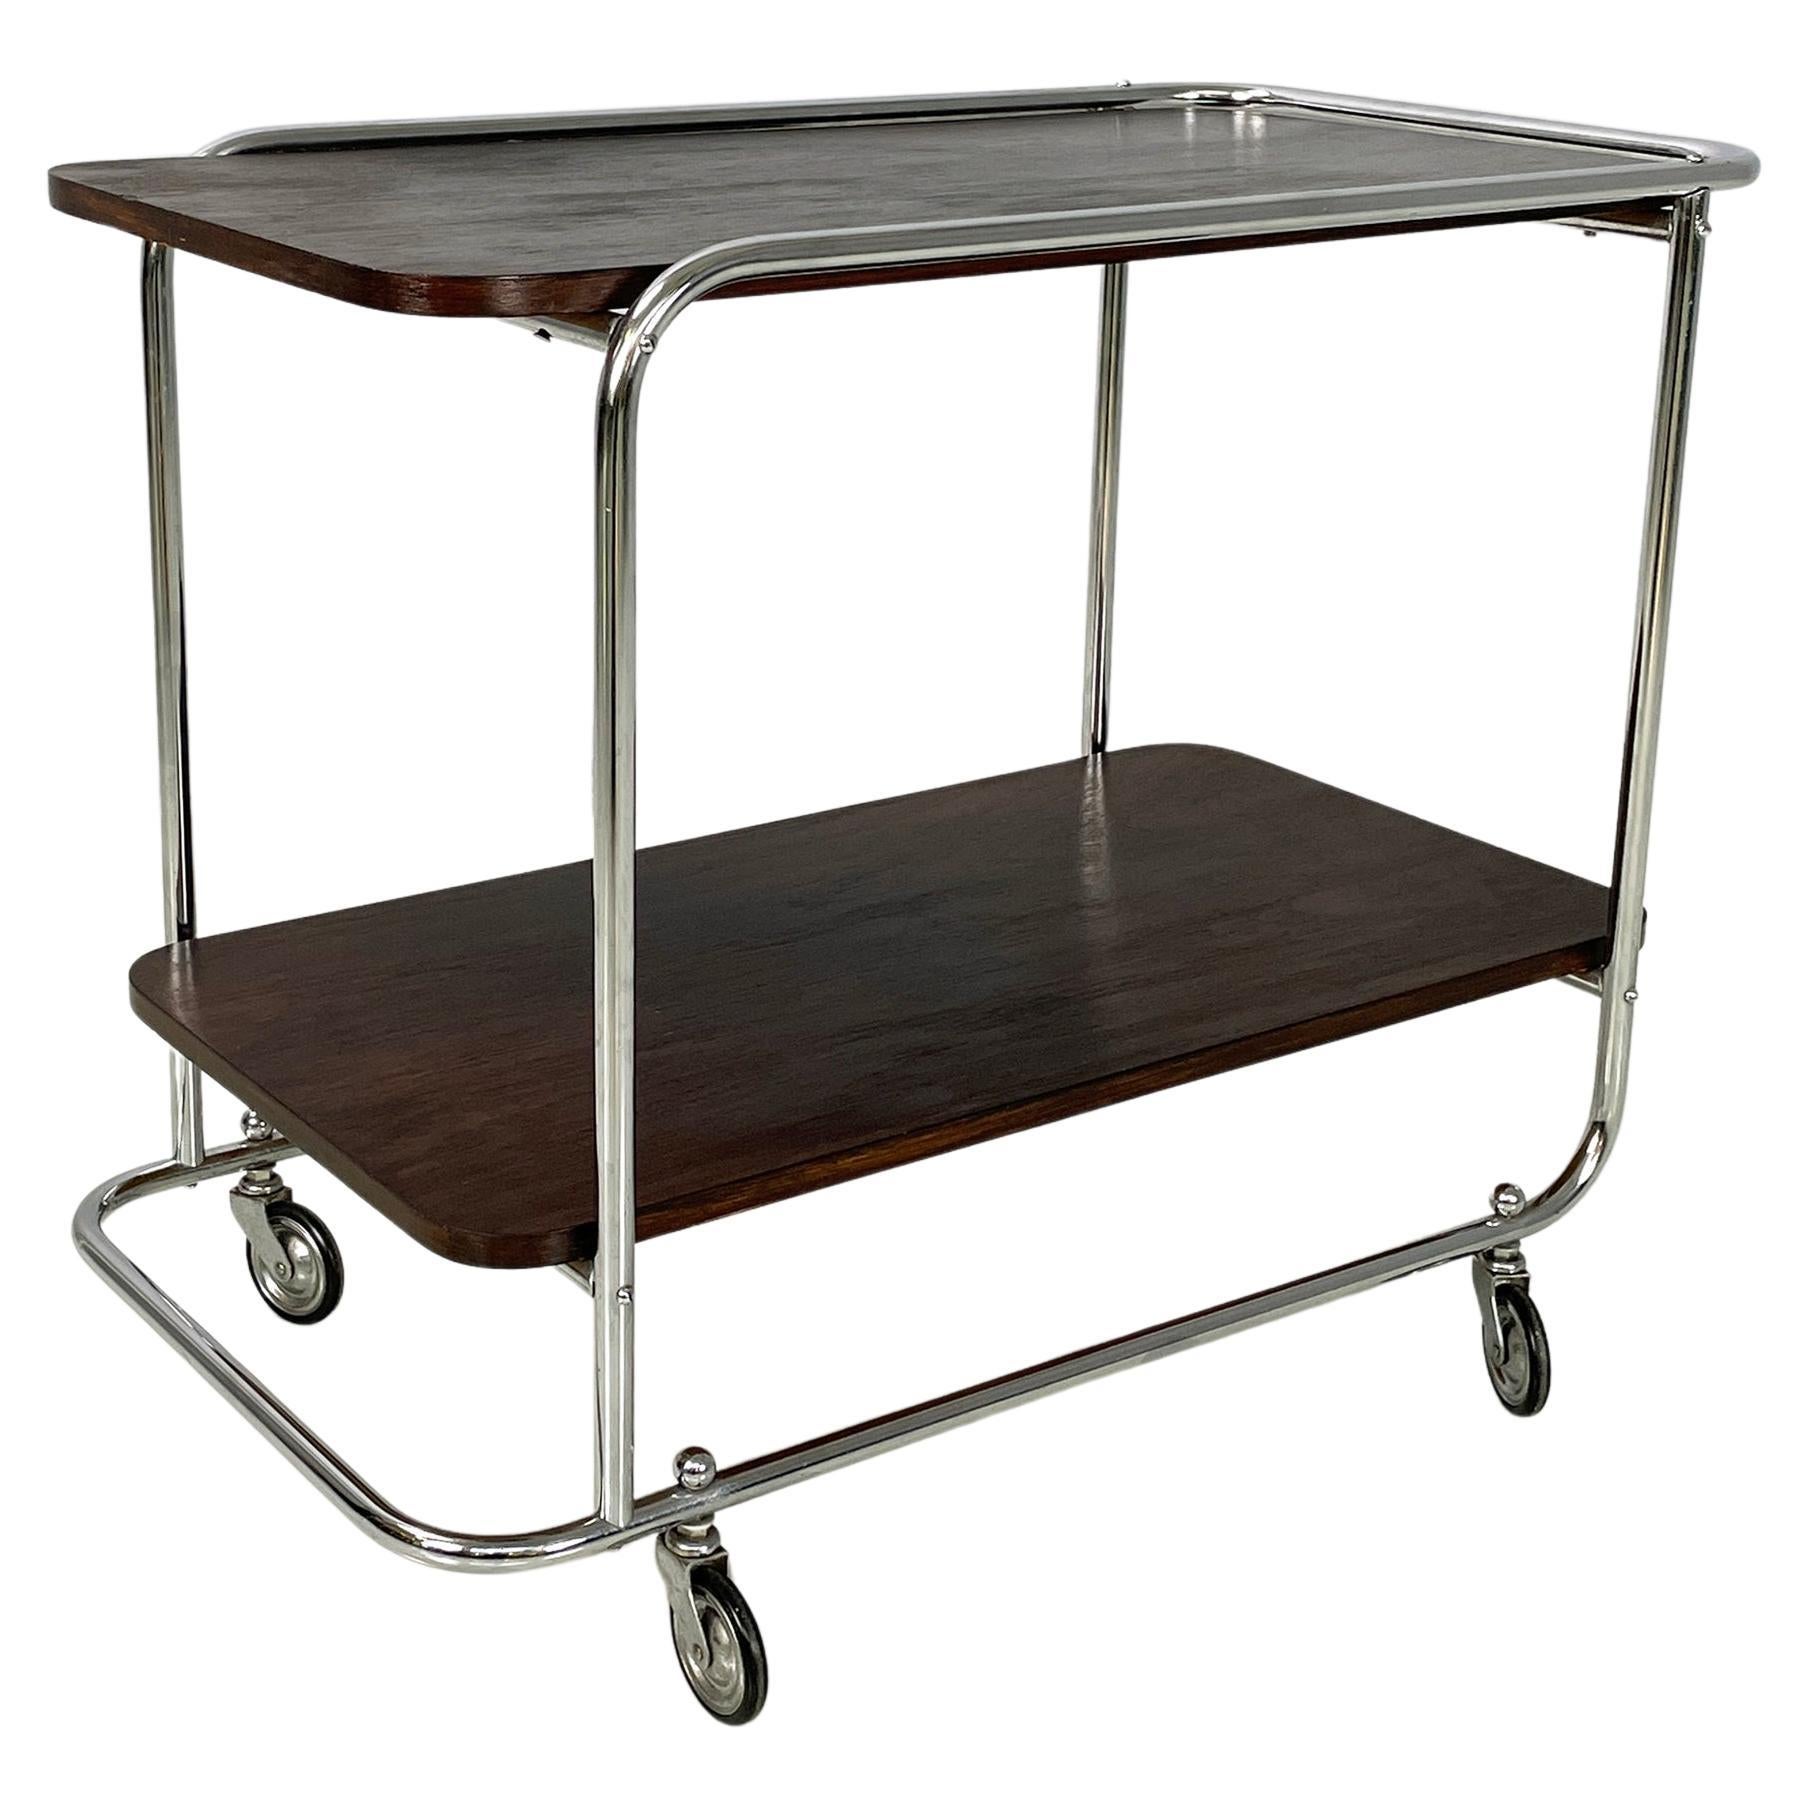 Italian mid-century modern Wood and metal cart with double shelf, 1940s For Sale